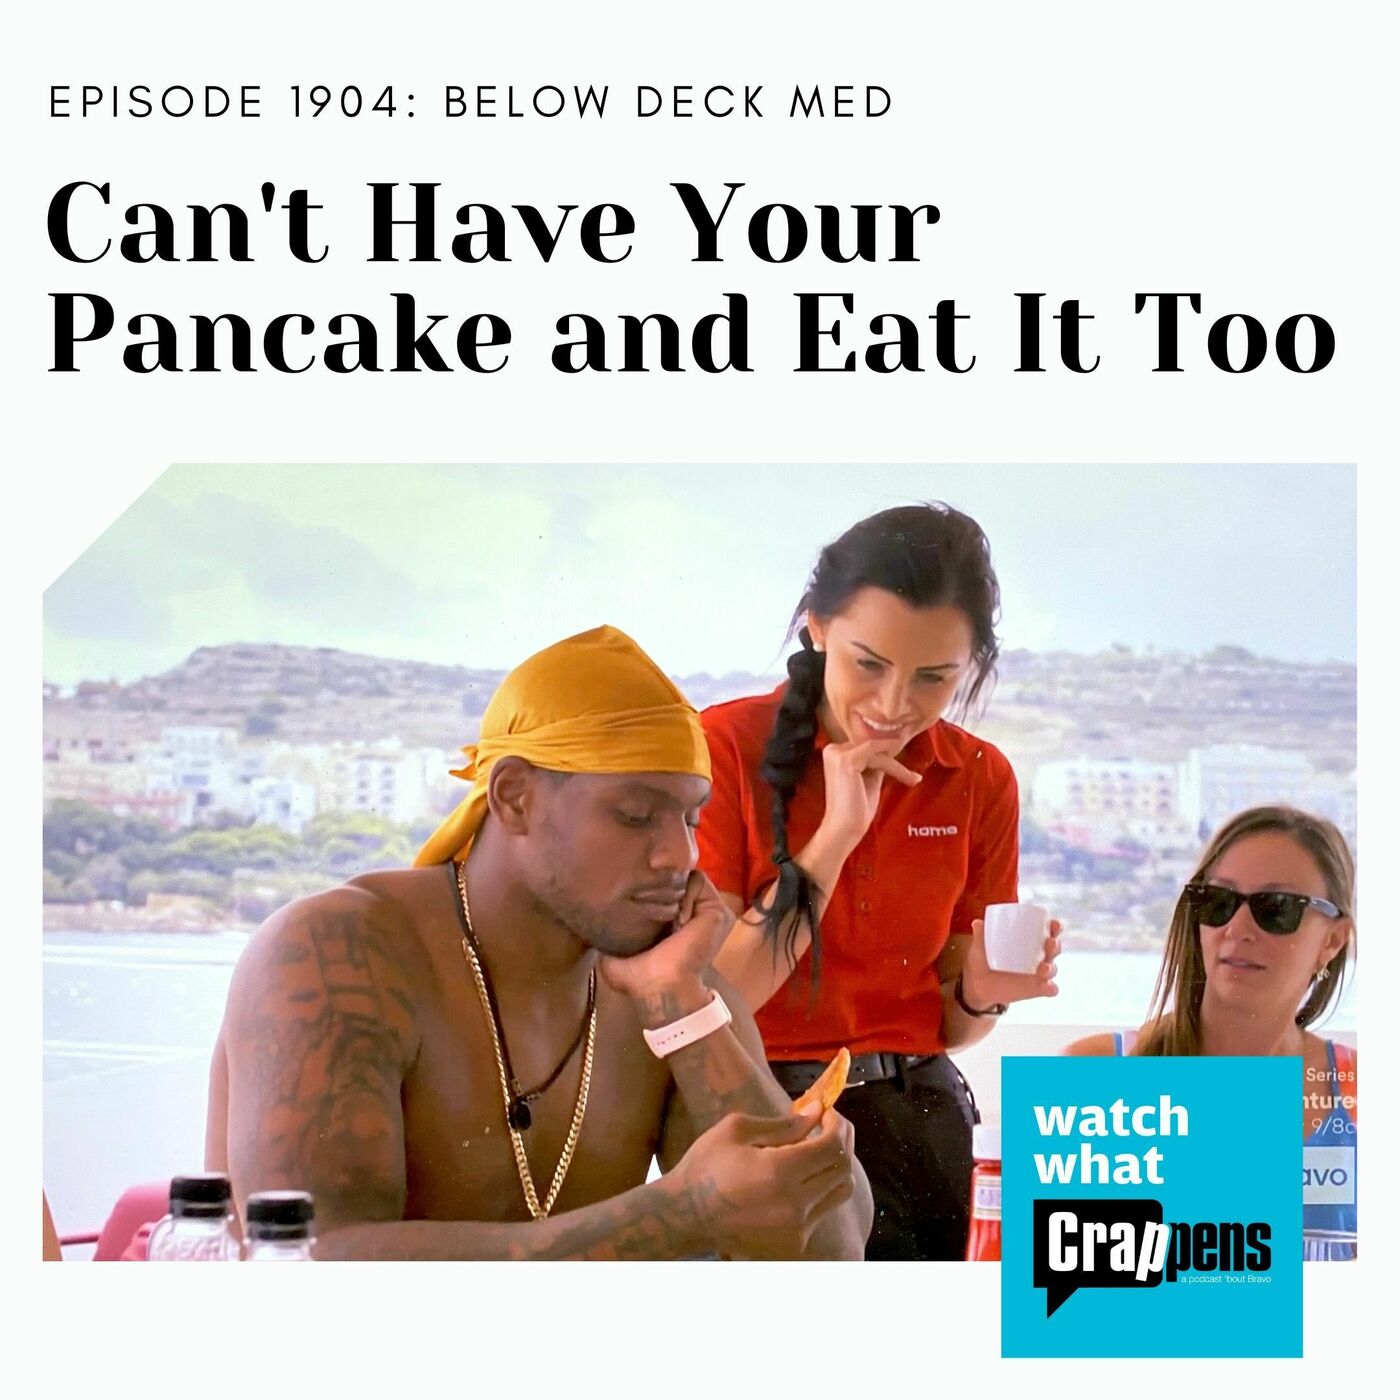 BelowDeckMed: Can't Have Your Pancake and Eat It Too